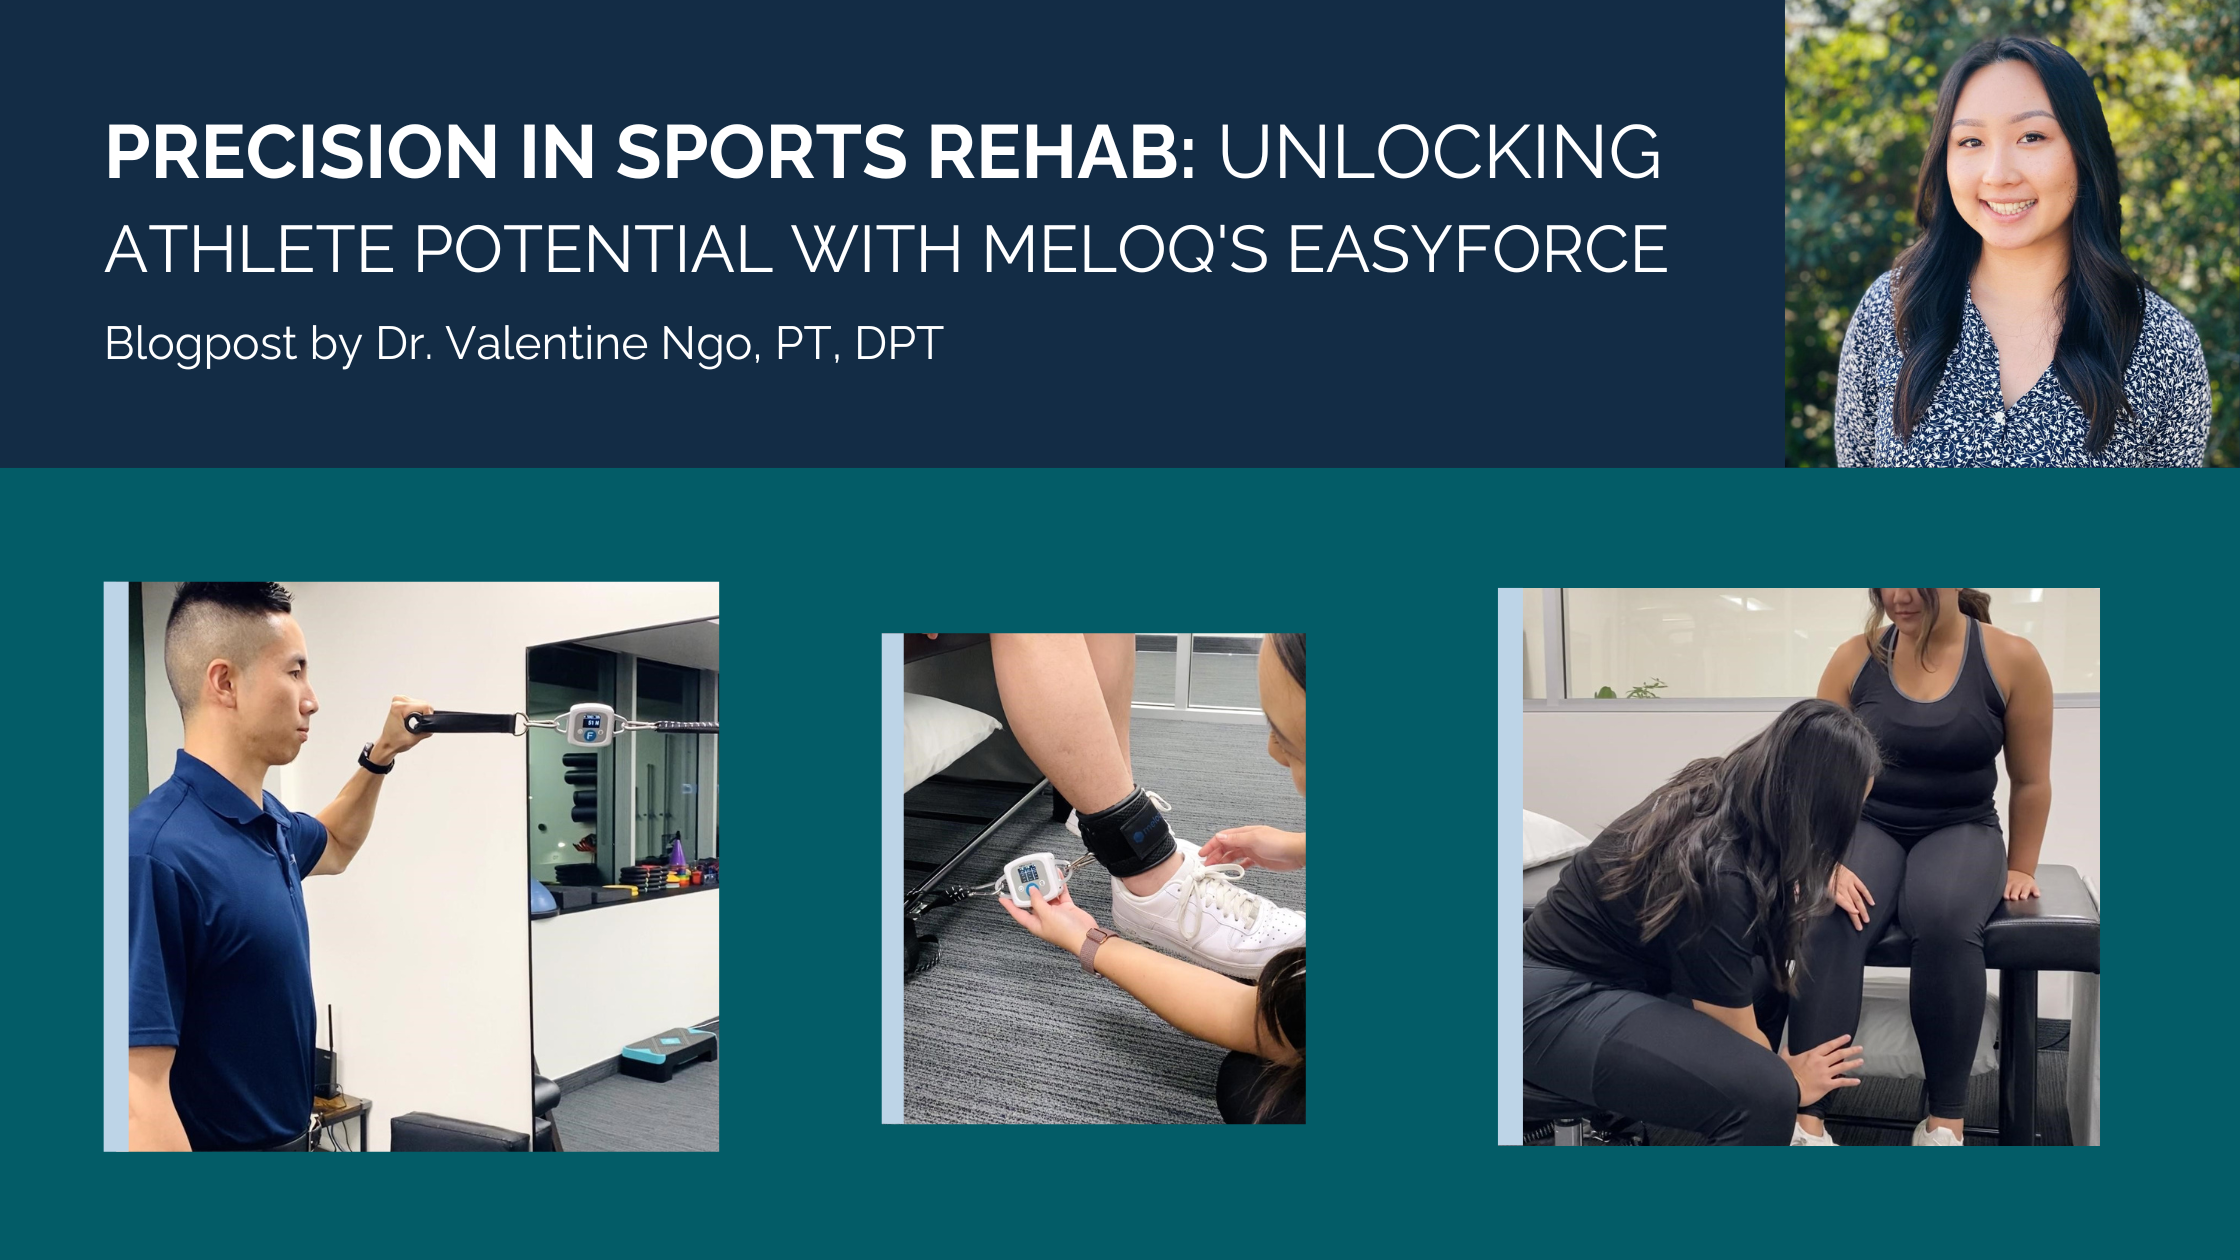 Precision in Sports Rehab:Unlocking Athlete Potential with Meloq's EasyForce